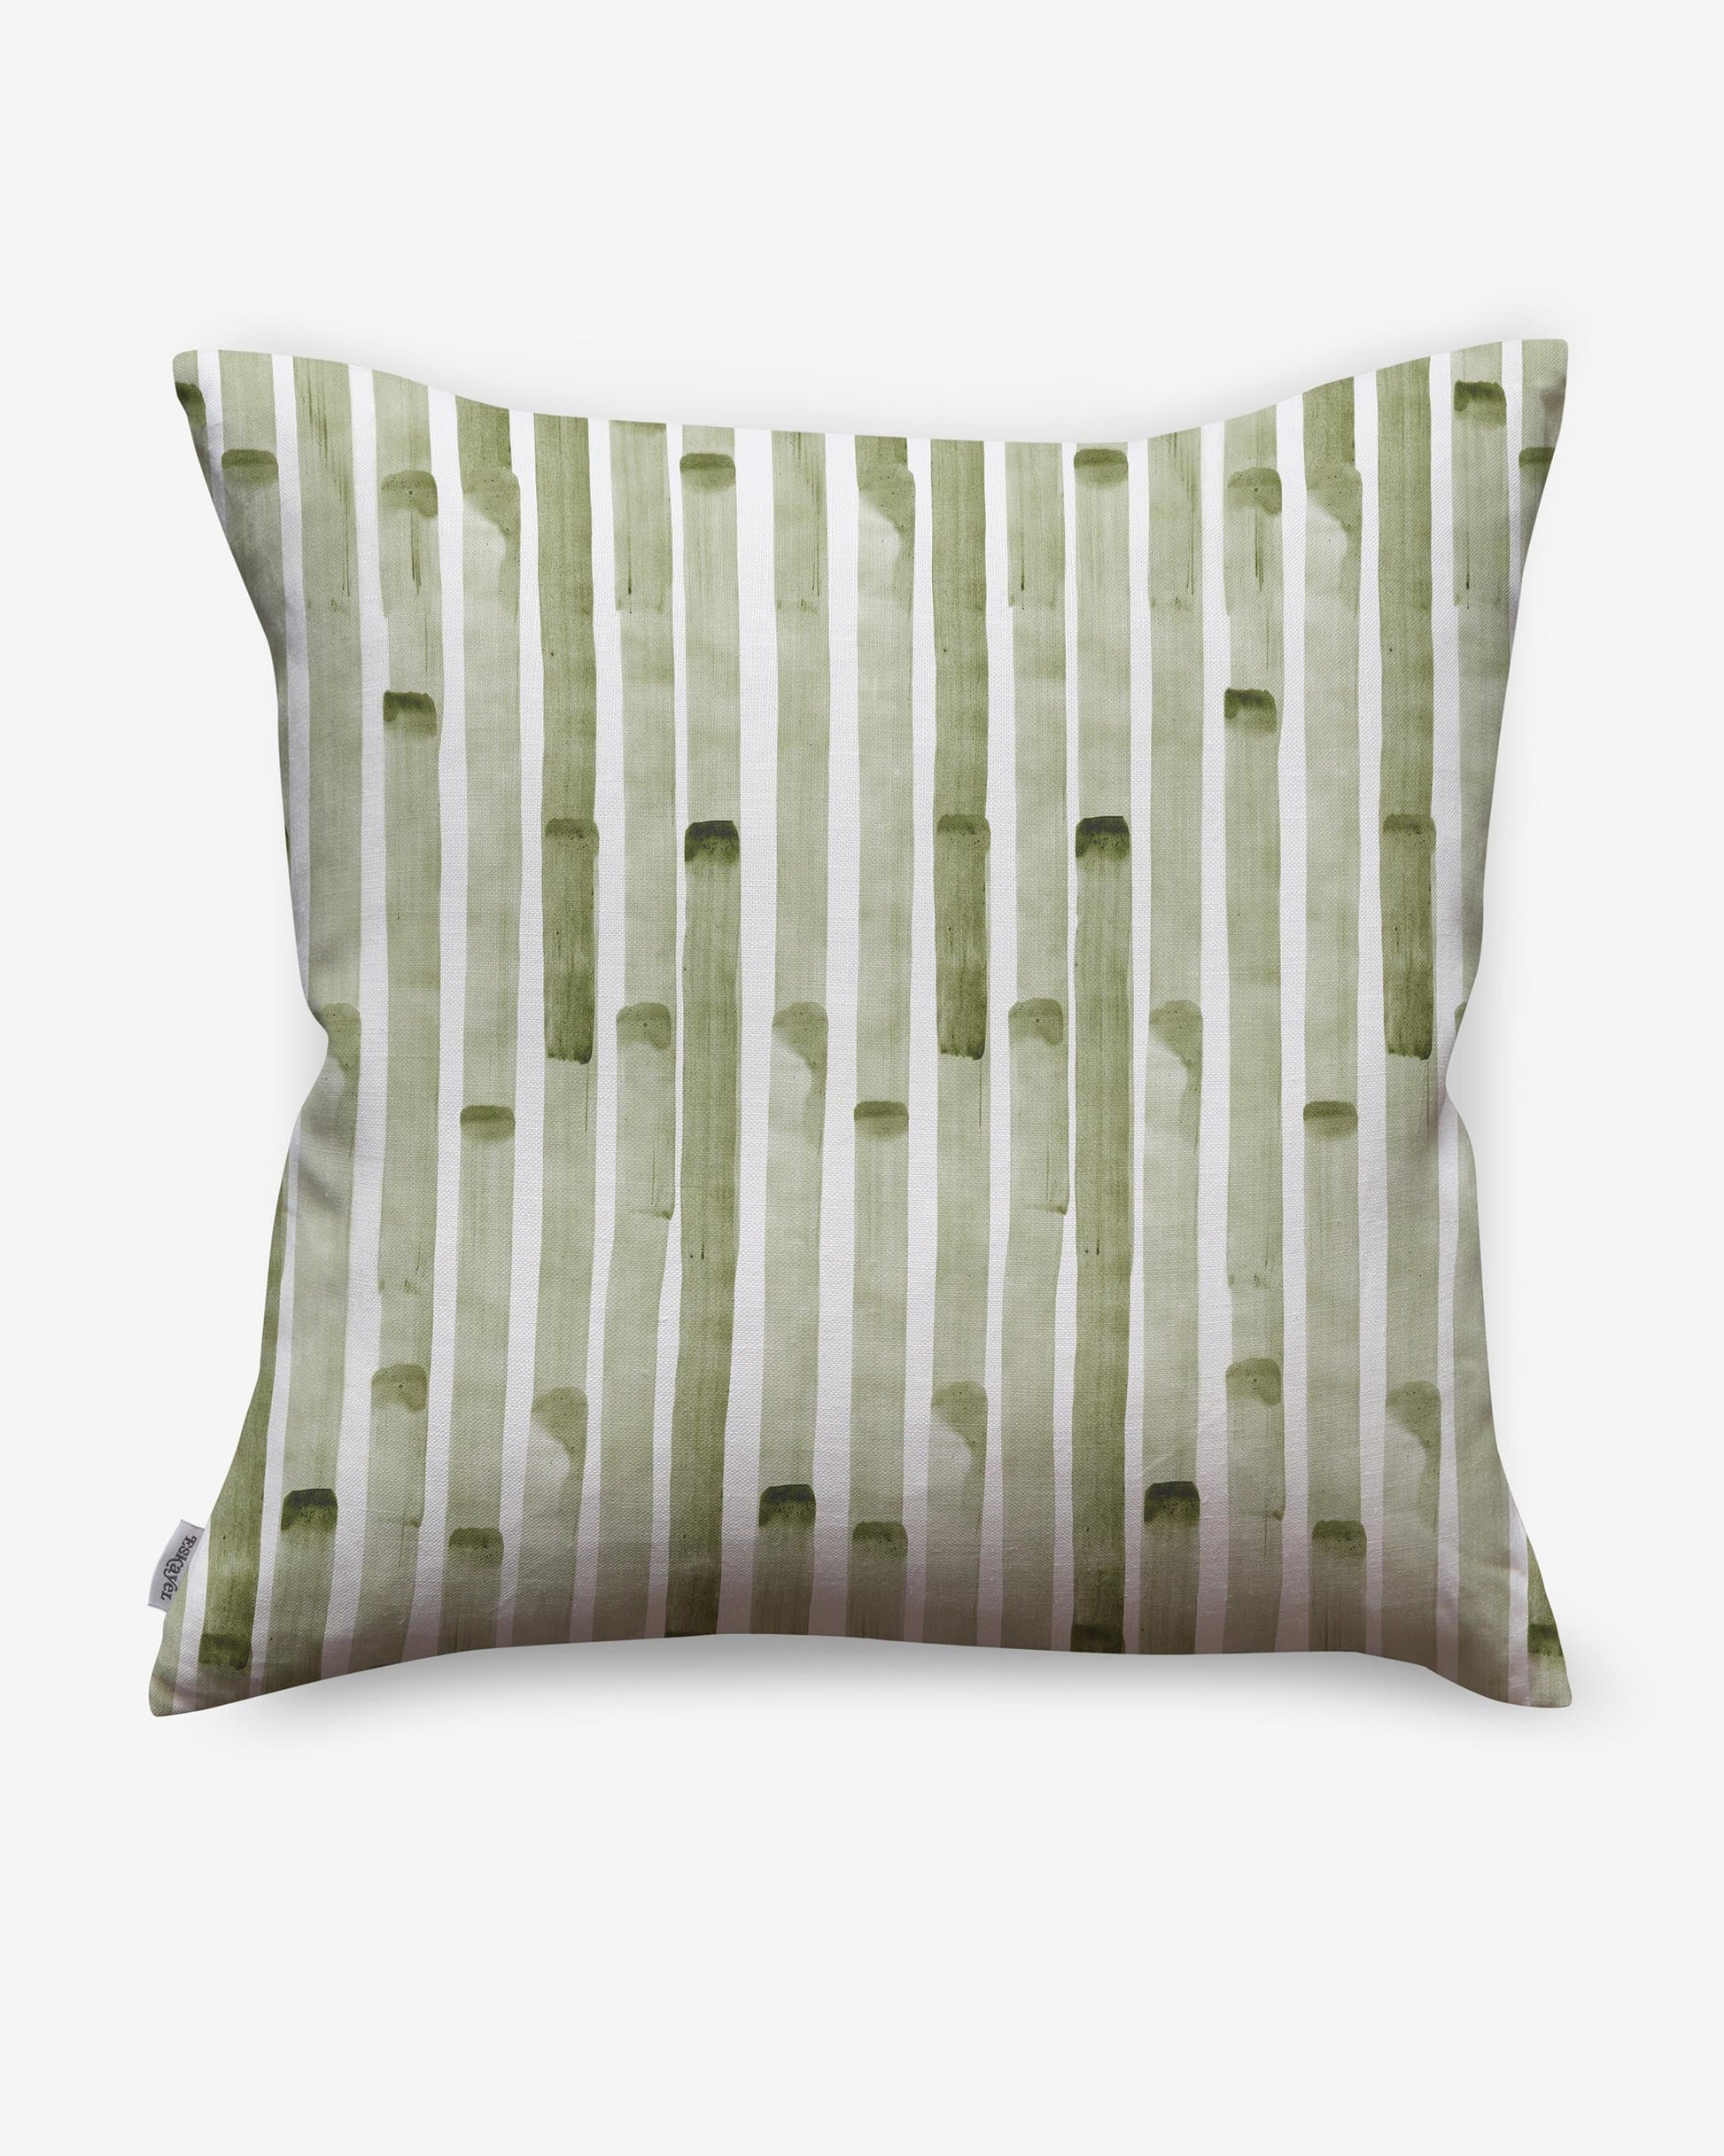 A luxurious Bamboo Stripe Pillow Brush with green and white stripes on it